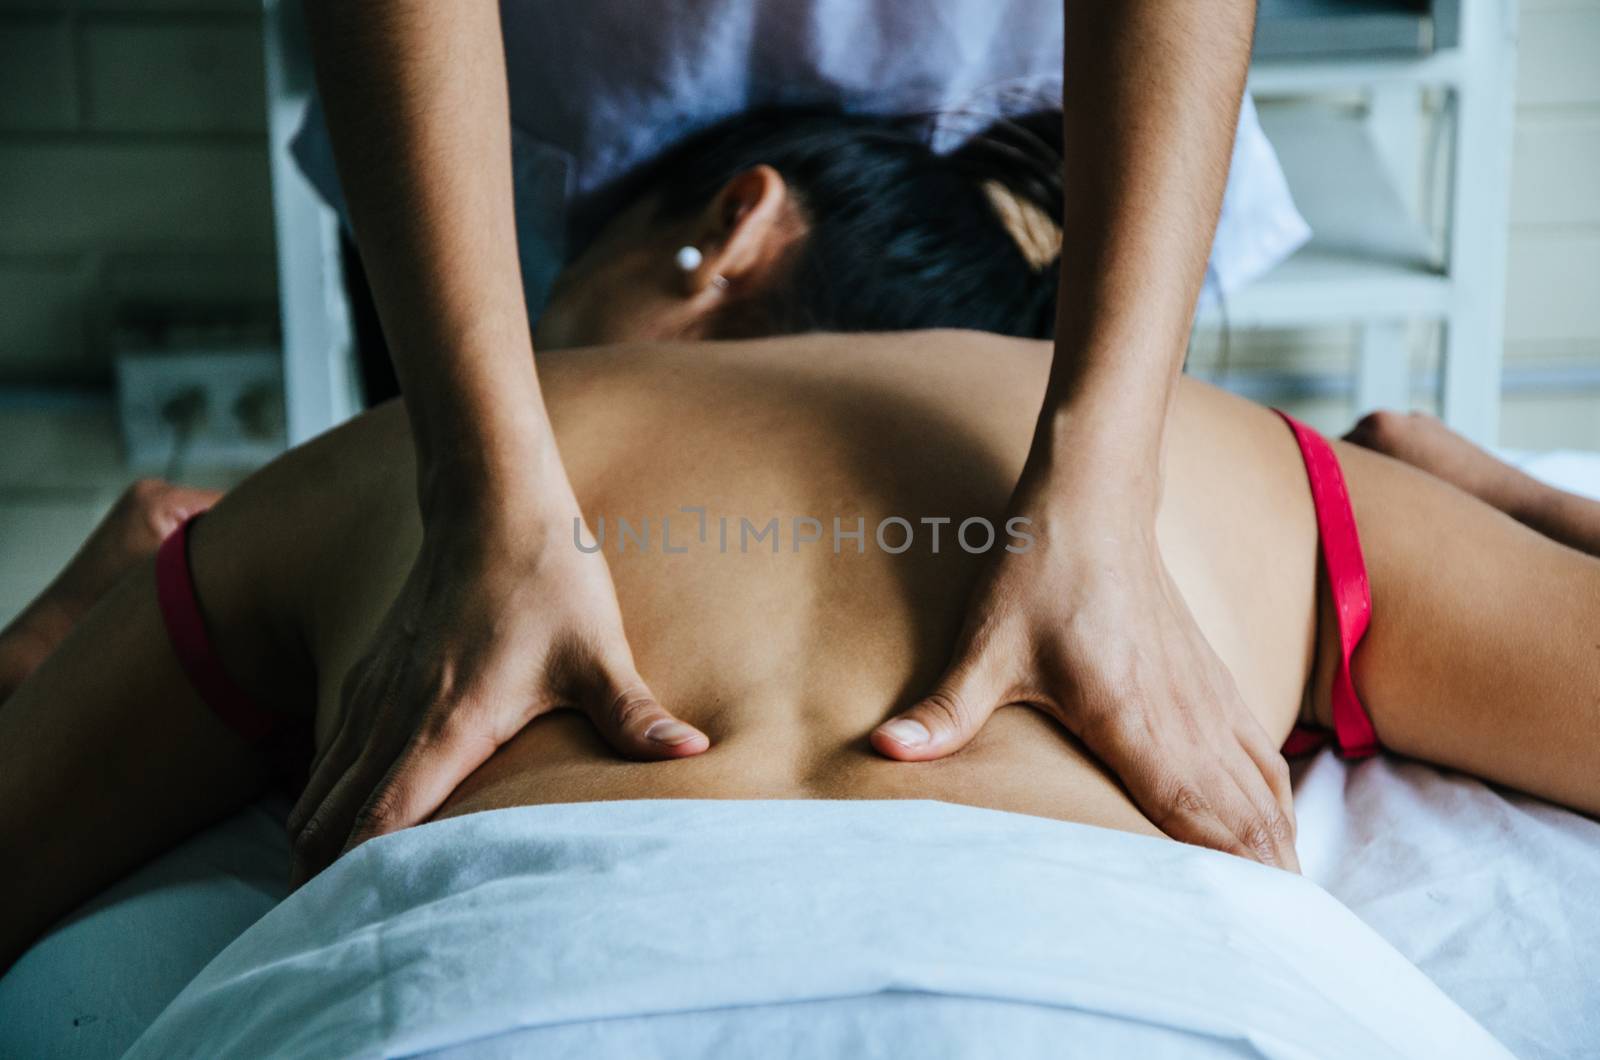 Relaxing massages by Peruphotoart